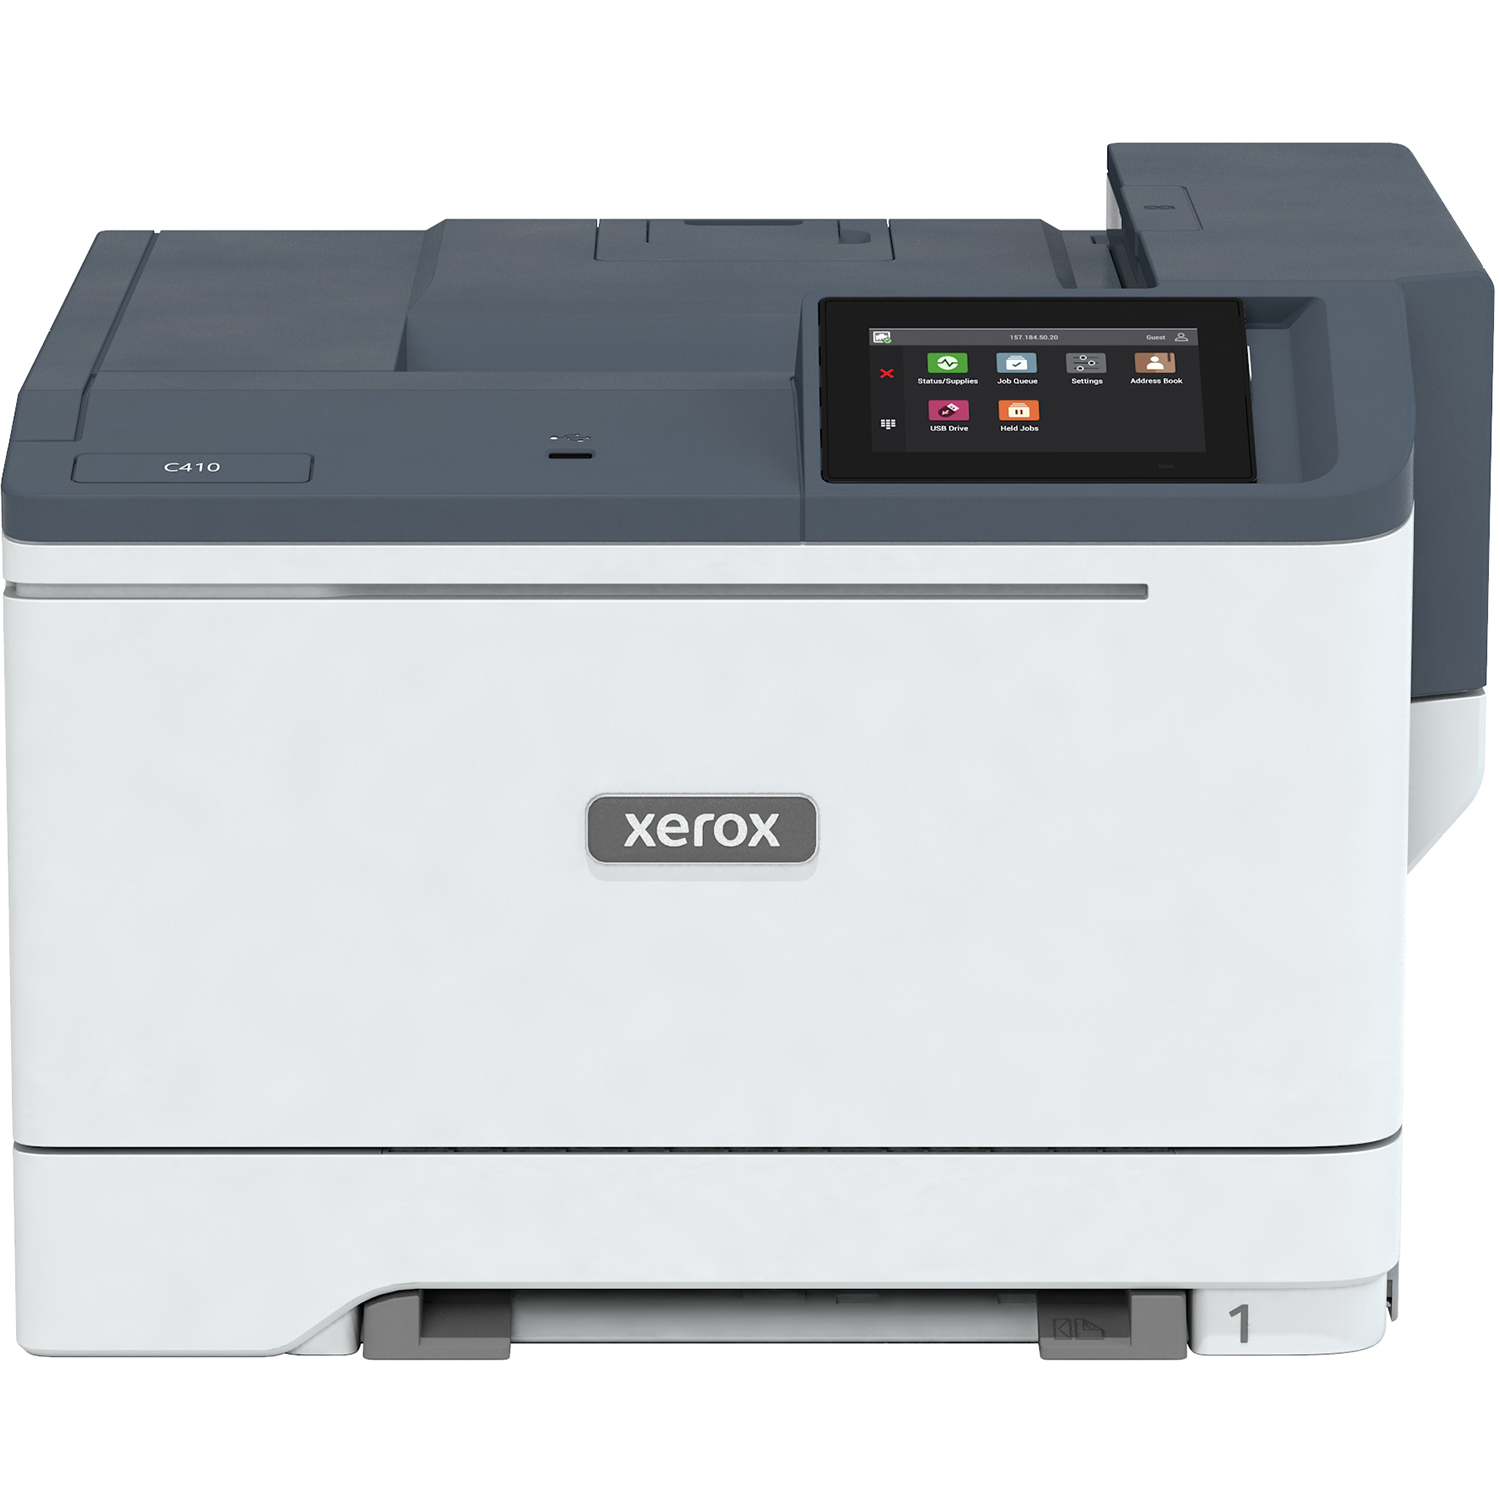 Brother launches new A3 printers to suit the modern business and hybrid  workers - Tech Guide